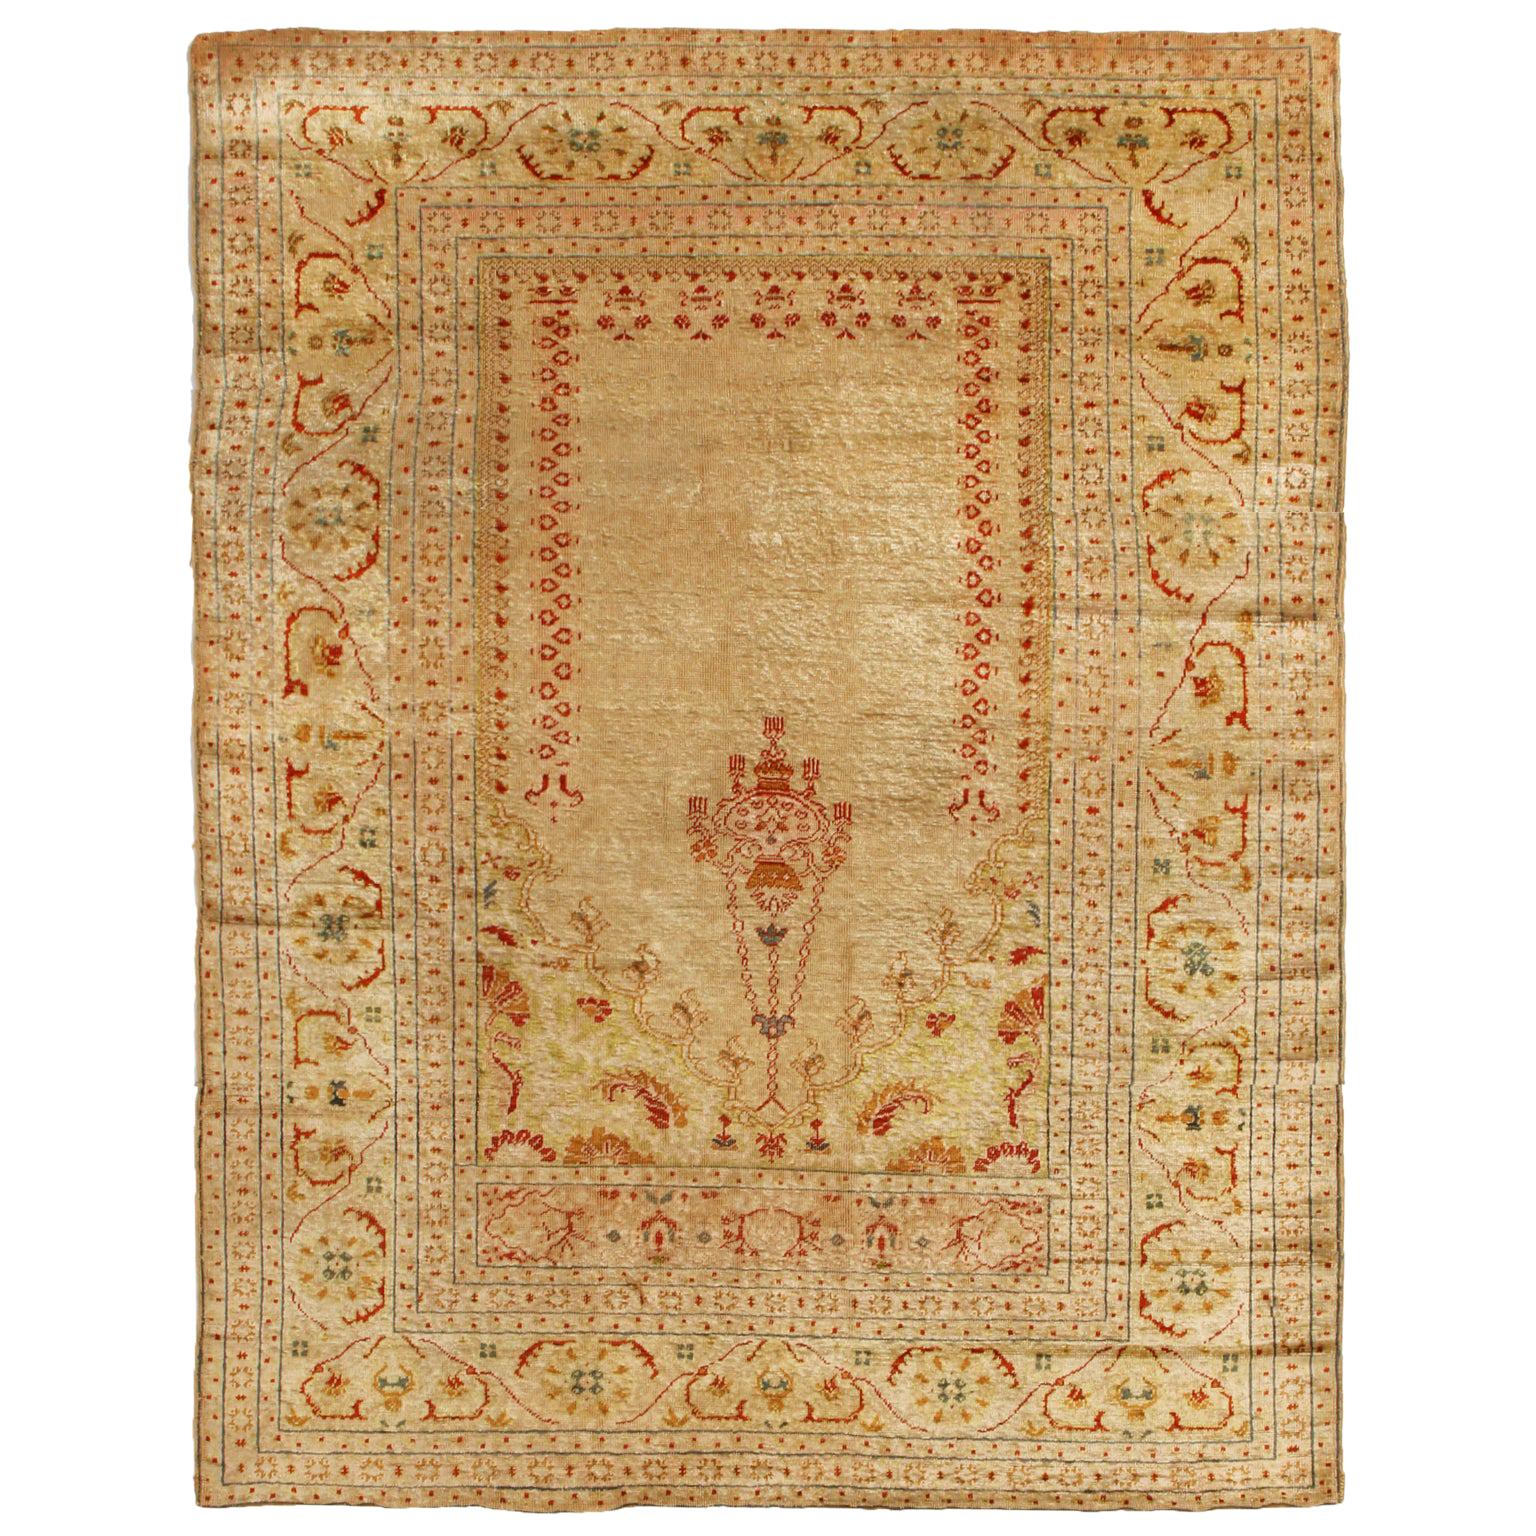 Antique Tabriz Beige and Red Persian Wool Rug